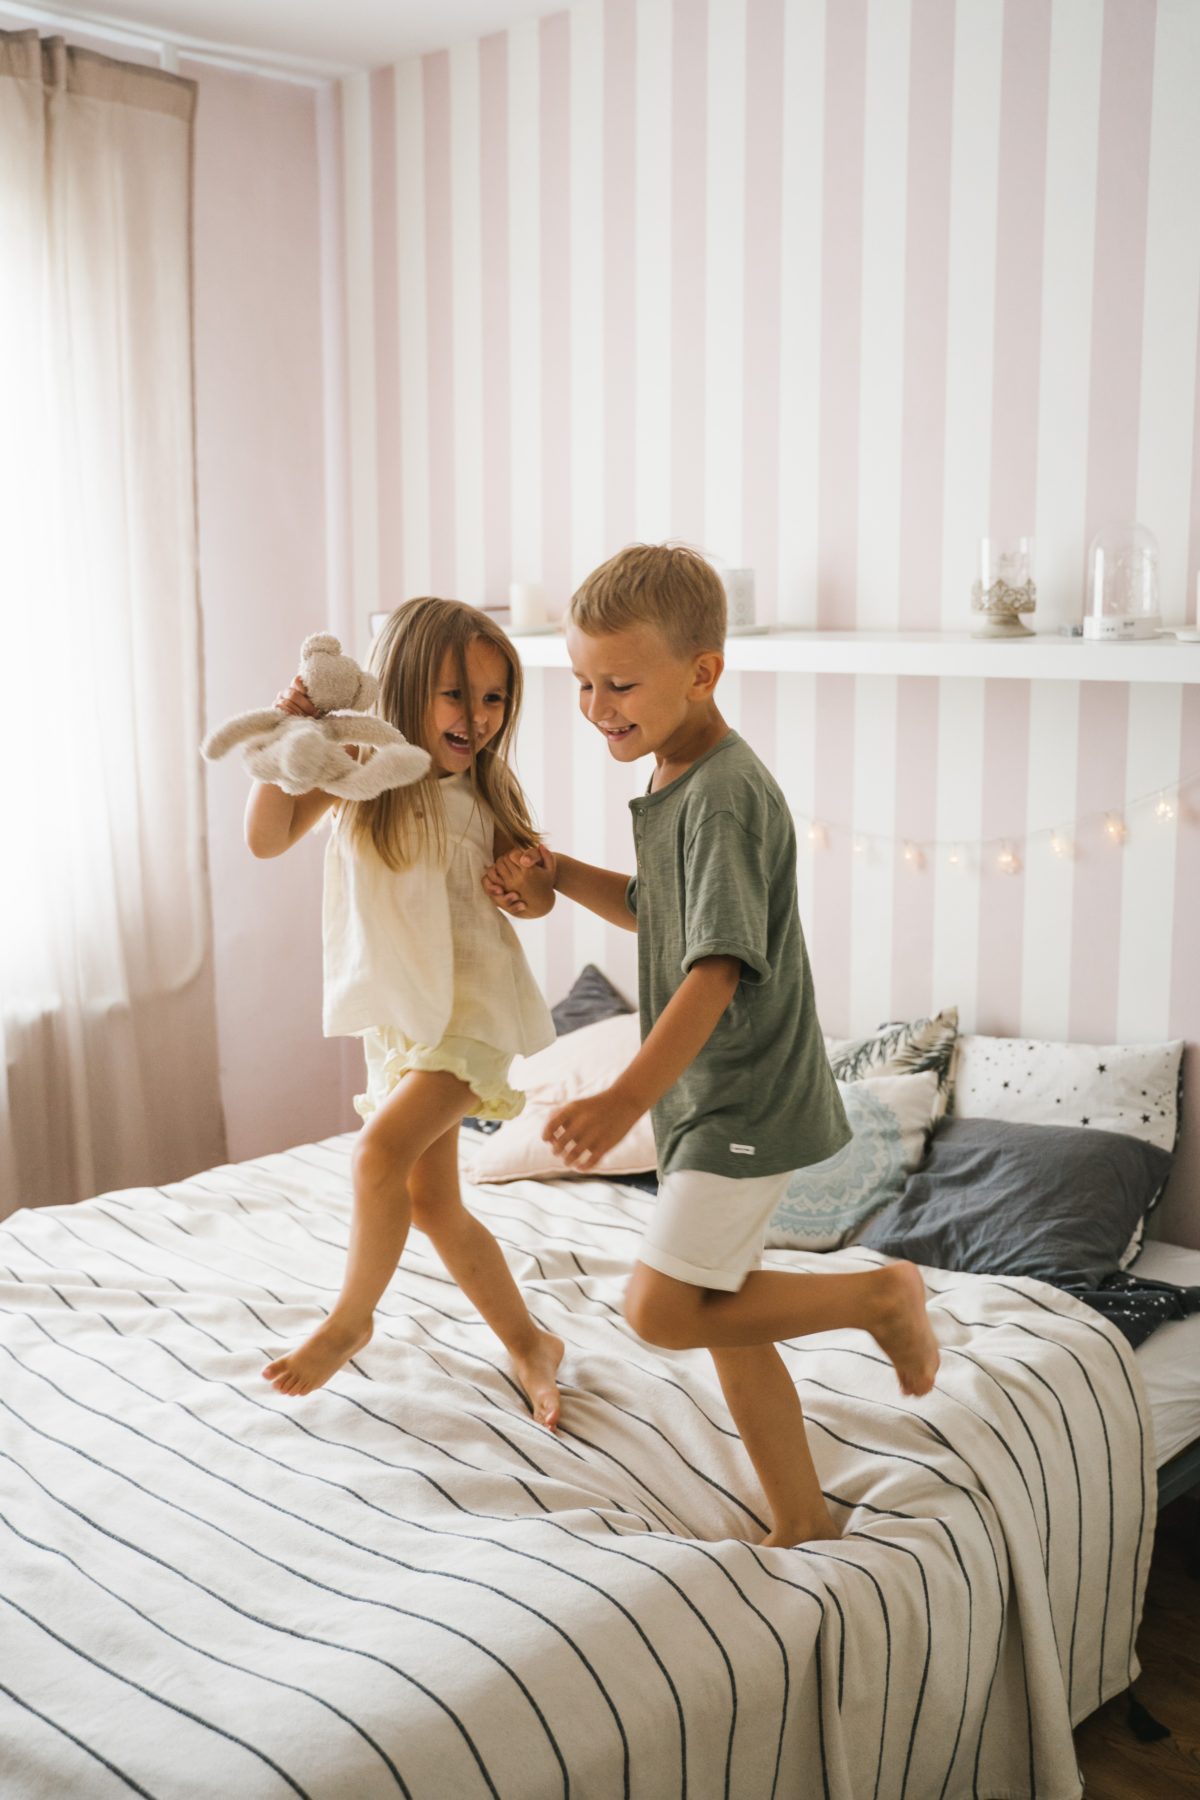 Young girl and boy jumping on a bed.